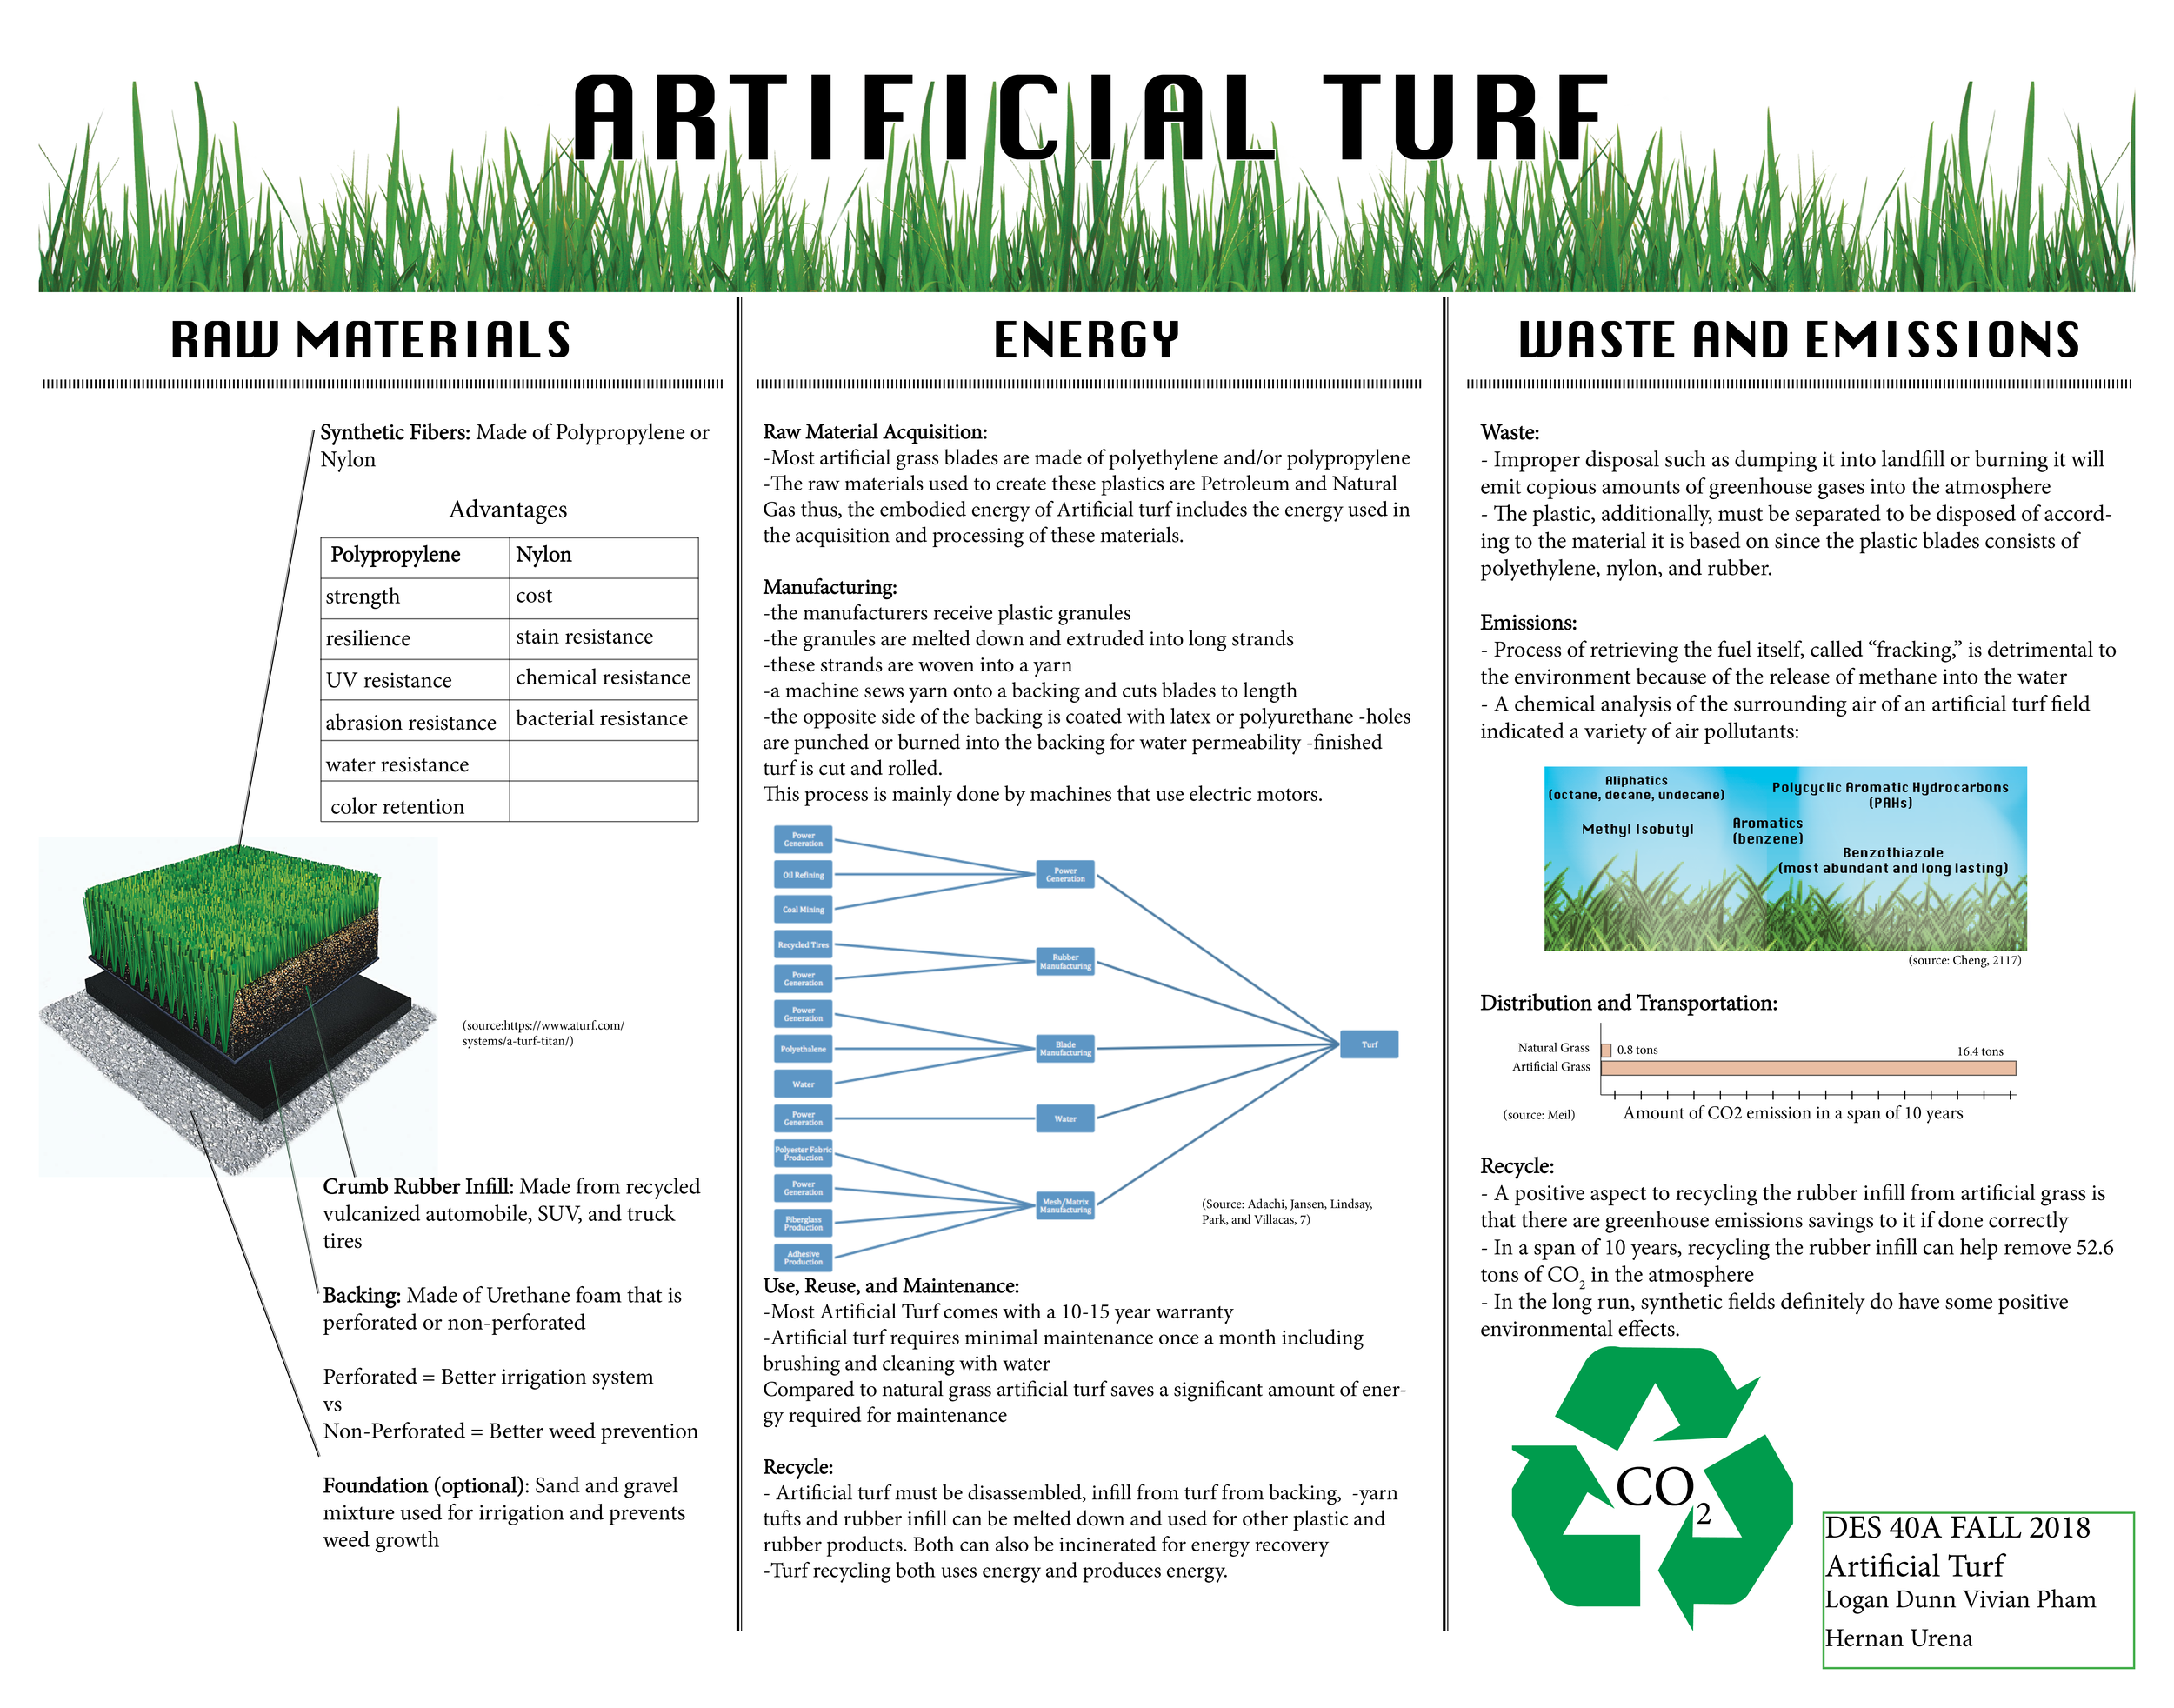 Artificial Turf Design Life-Cycle —